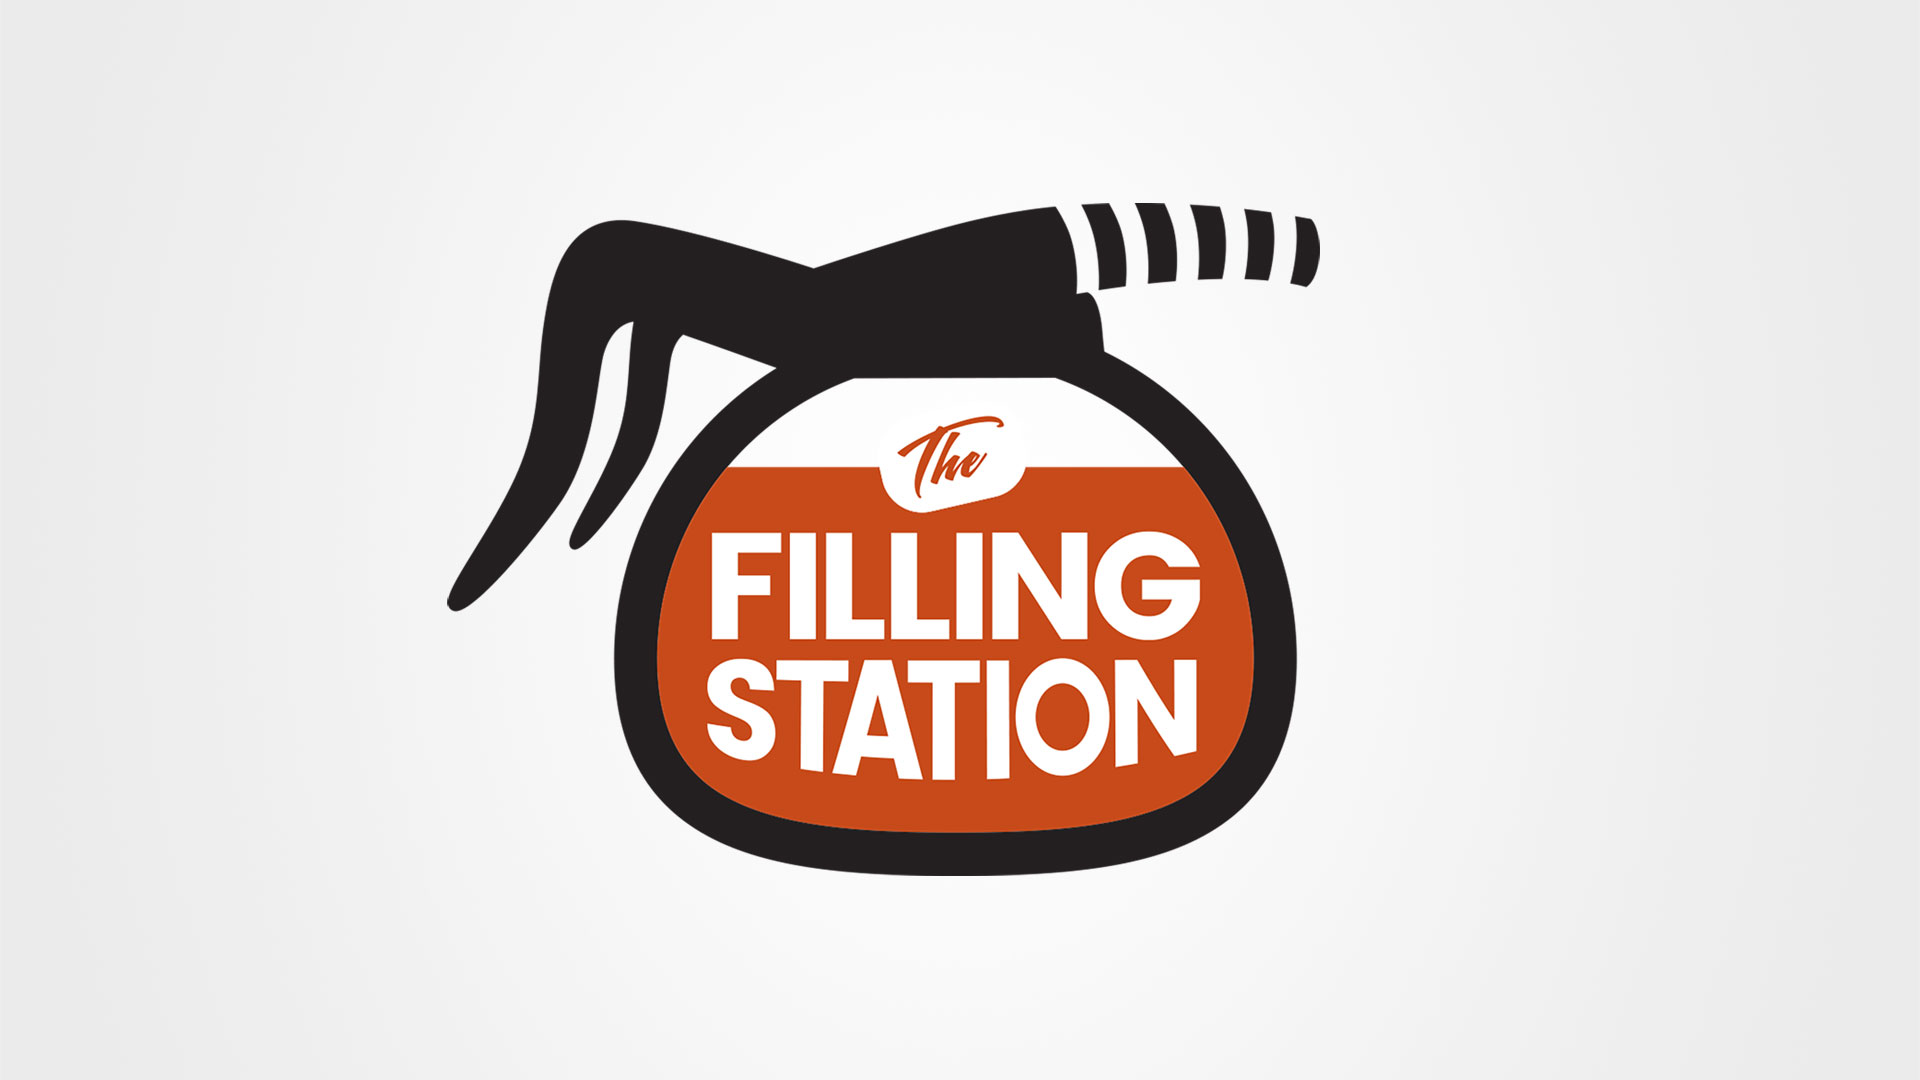 The-Filling-Station-1920x1080